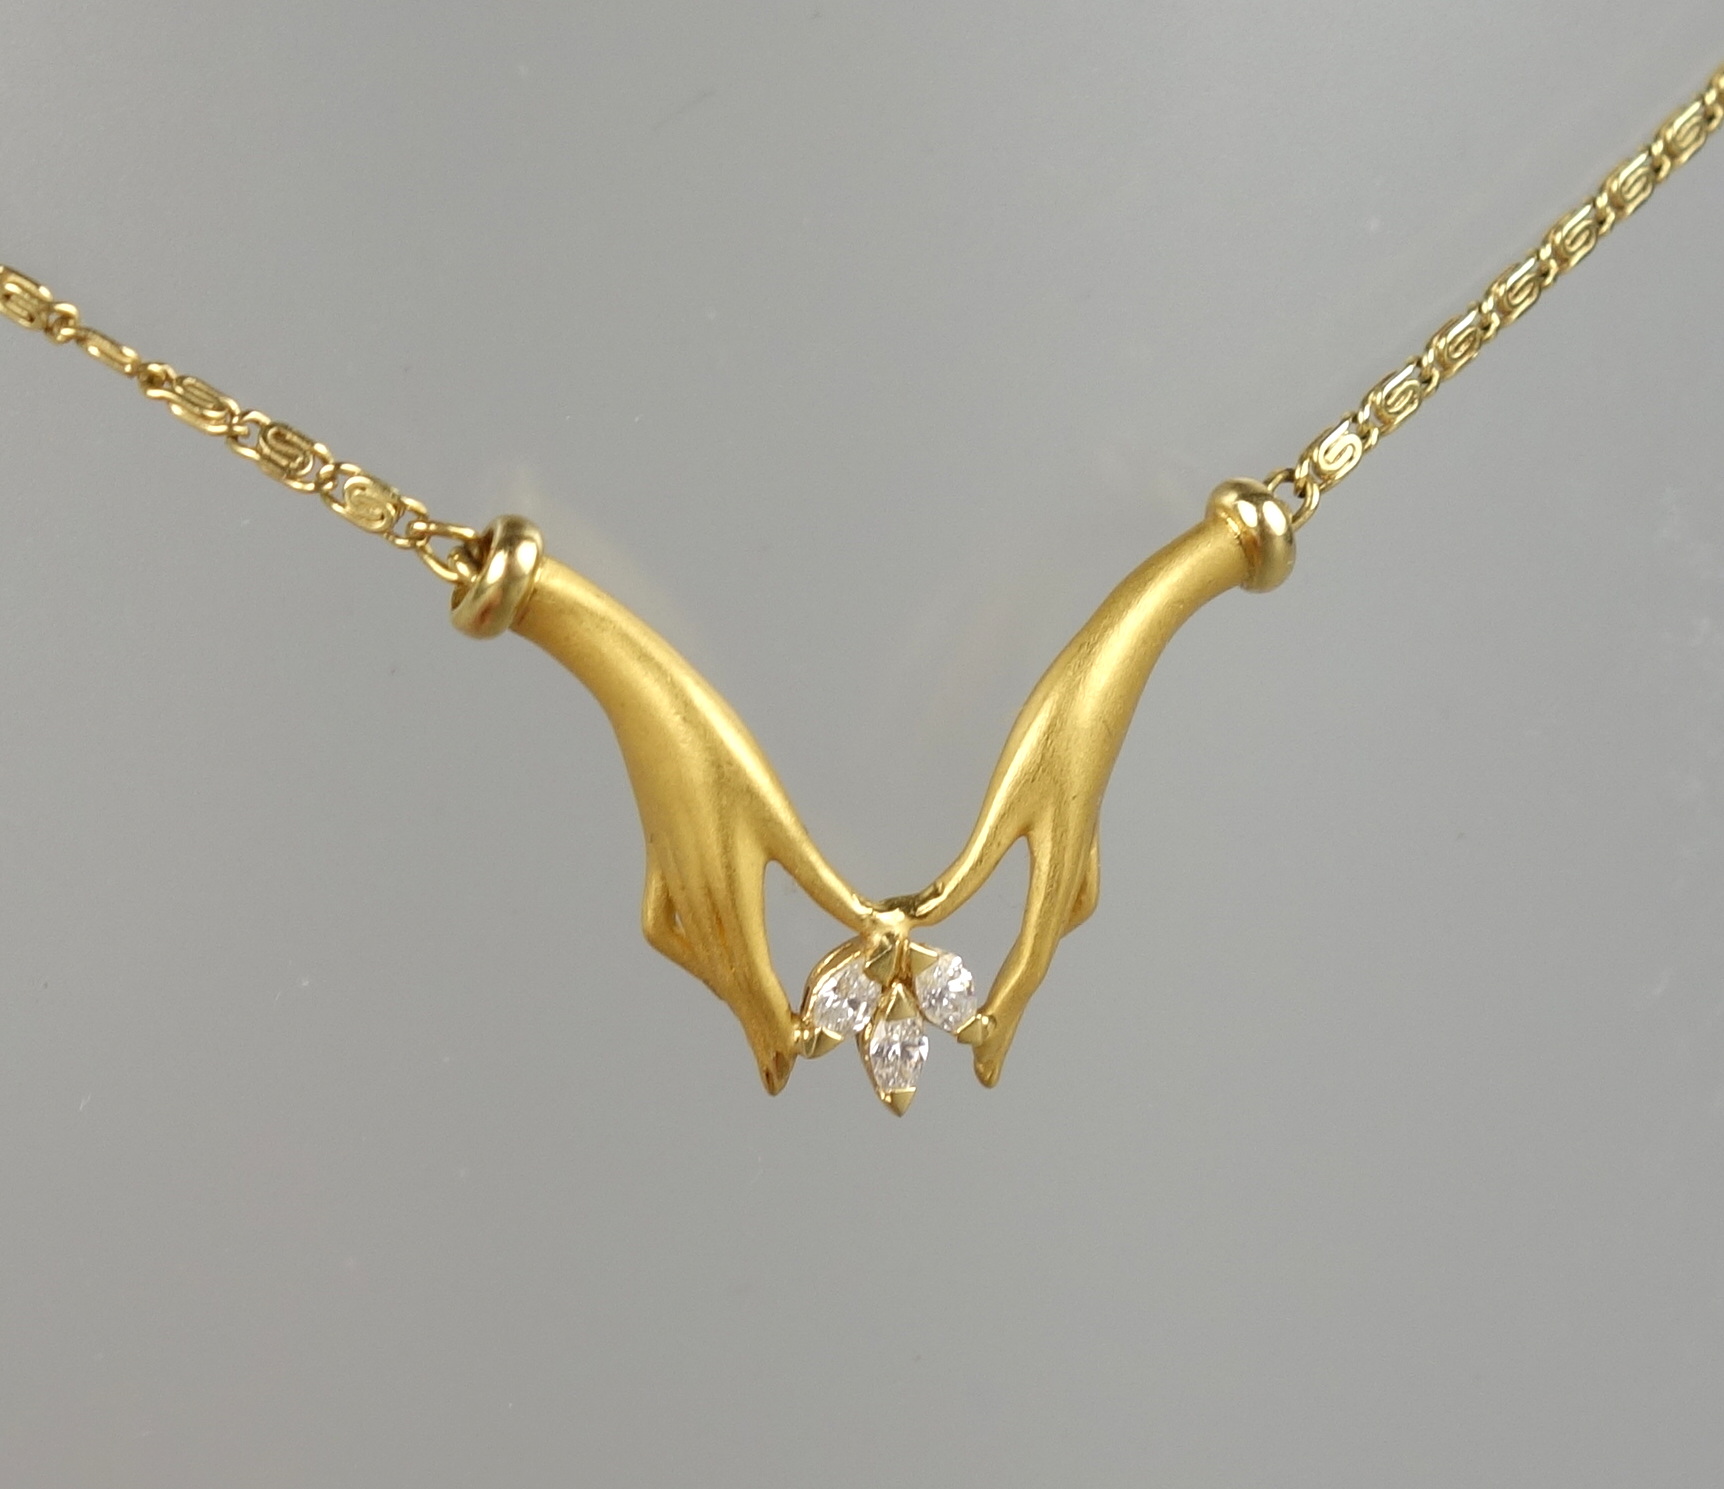 Necklace "Hands", CARRERA Y CARRERA, with 3 navettes diamonds, 18K gold - Image 2 of 4